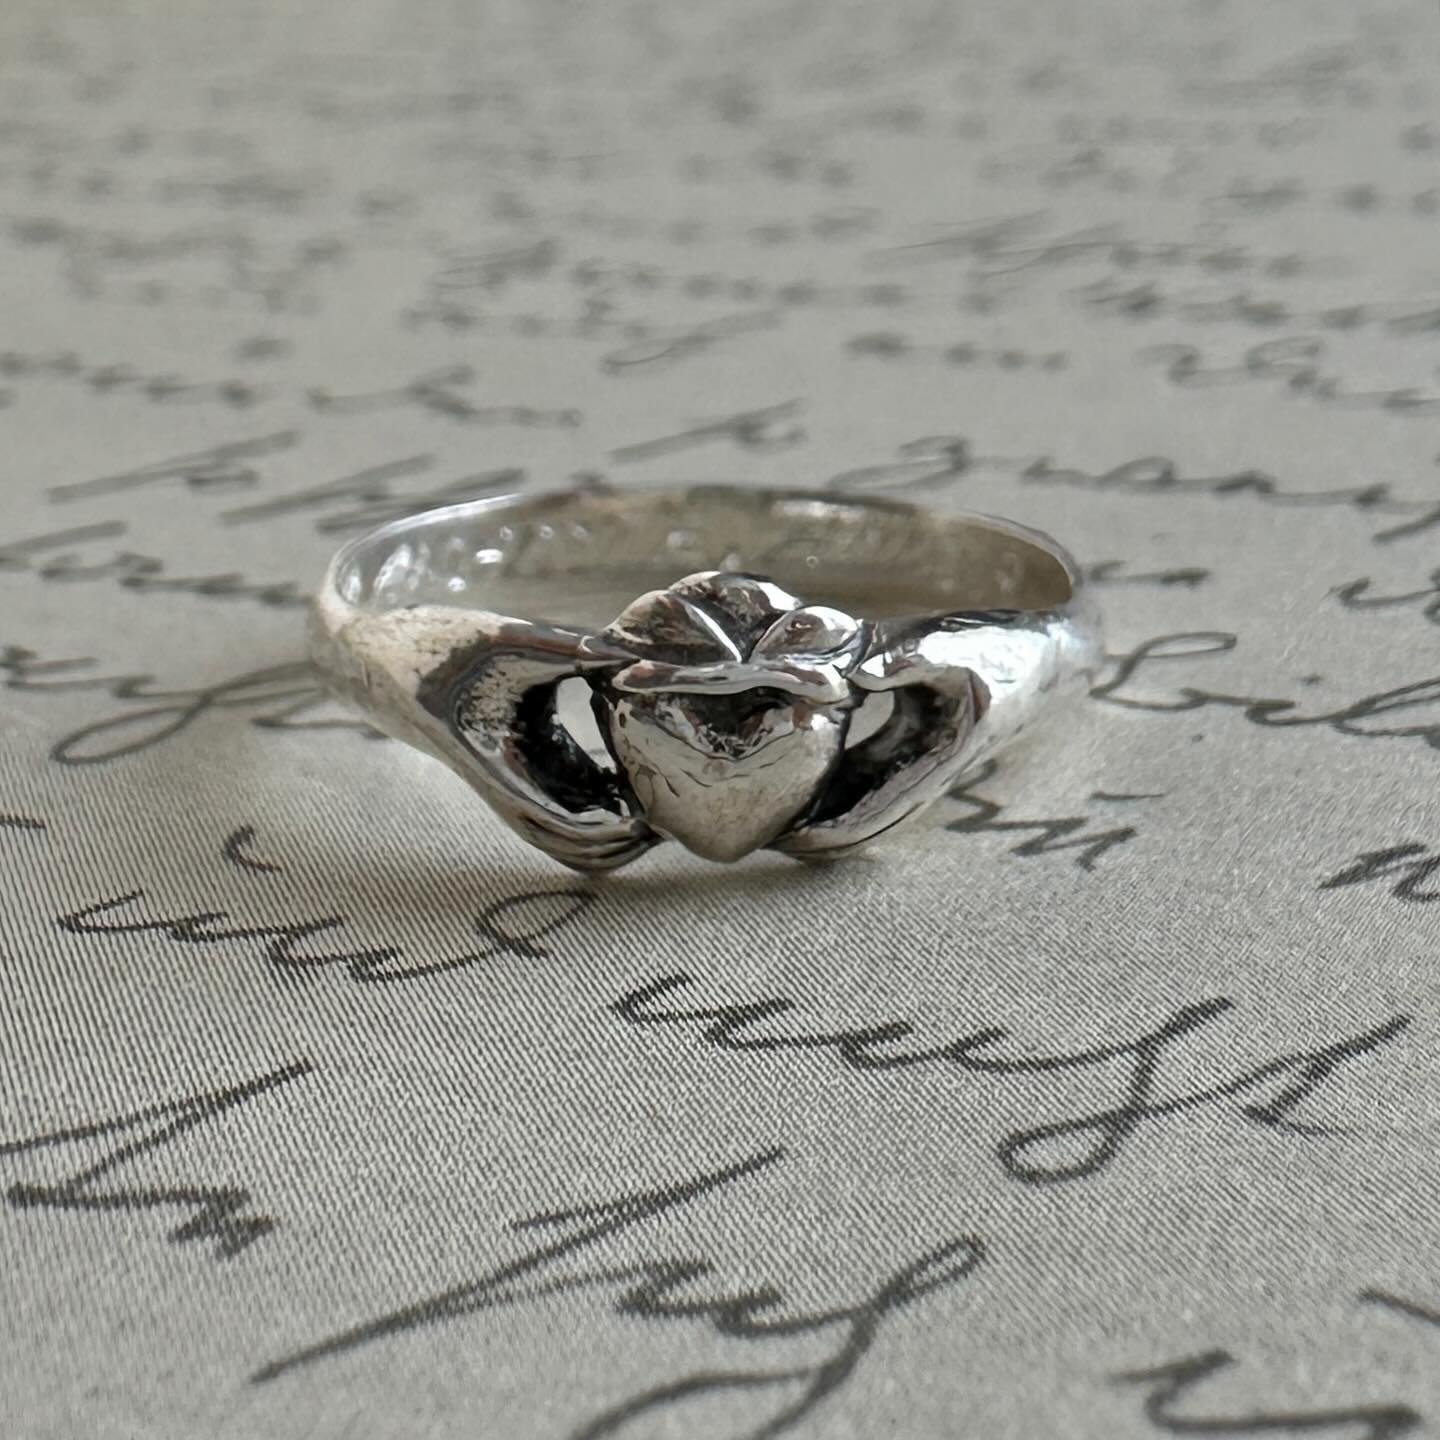 Classic Claddagh ring for Nathalie @nuevaeramtl to celebrate their anniversary 🎂💞 thank you for your trust 🥰

By yours truly,
BDJ xo

*note: this is a custom project.*